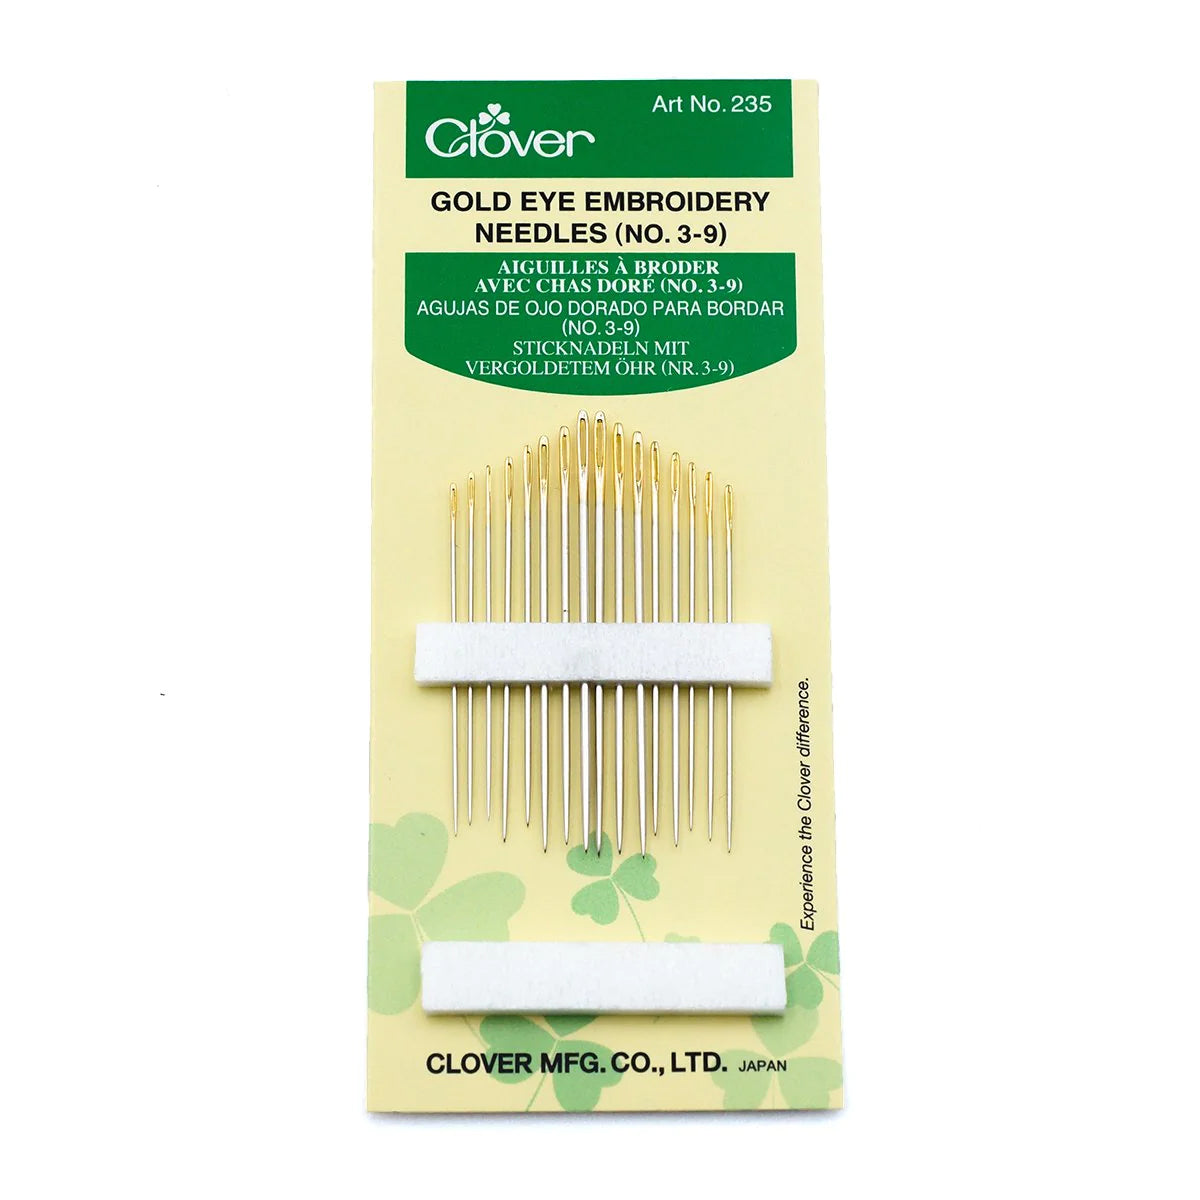 Clover Gold Eye Embroidery Needles (235)